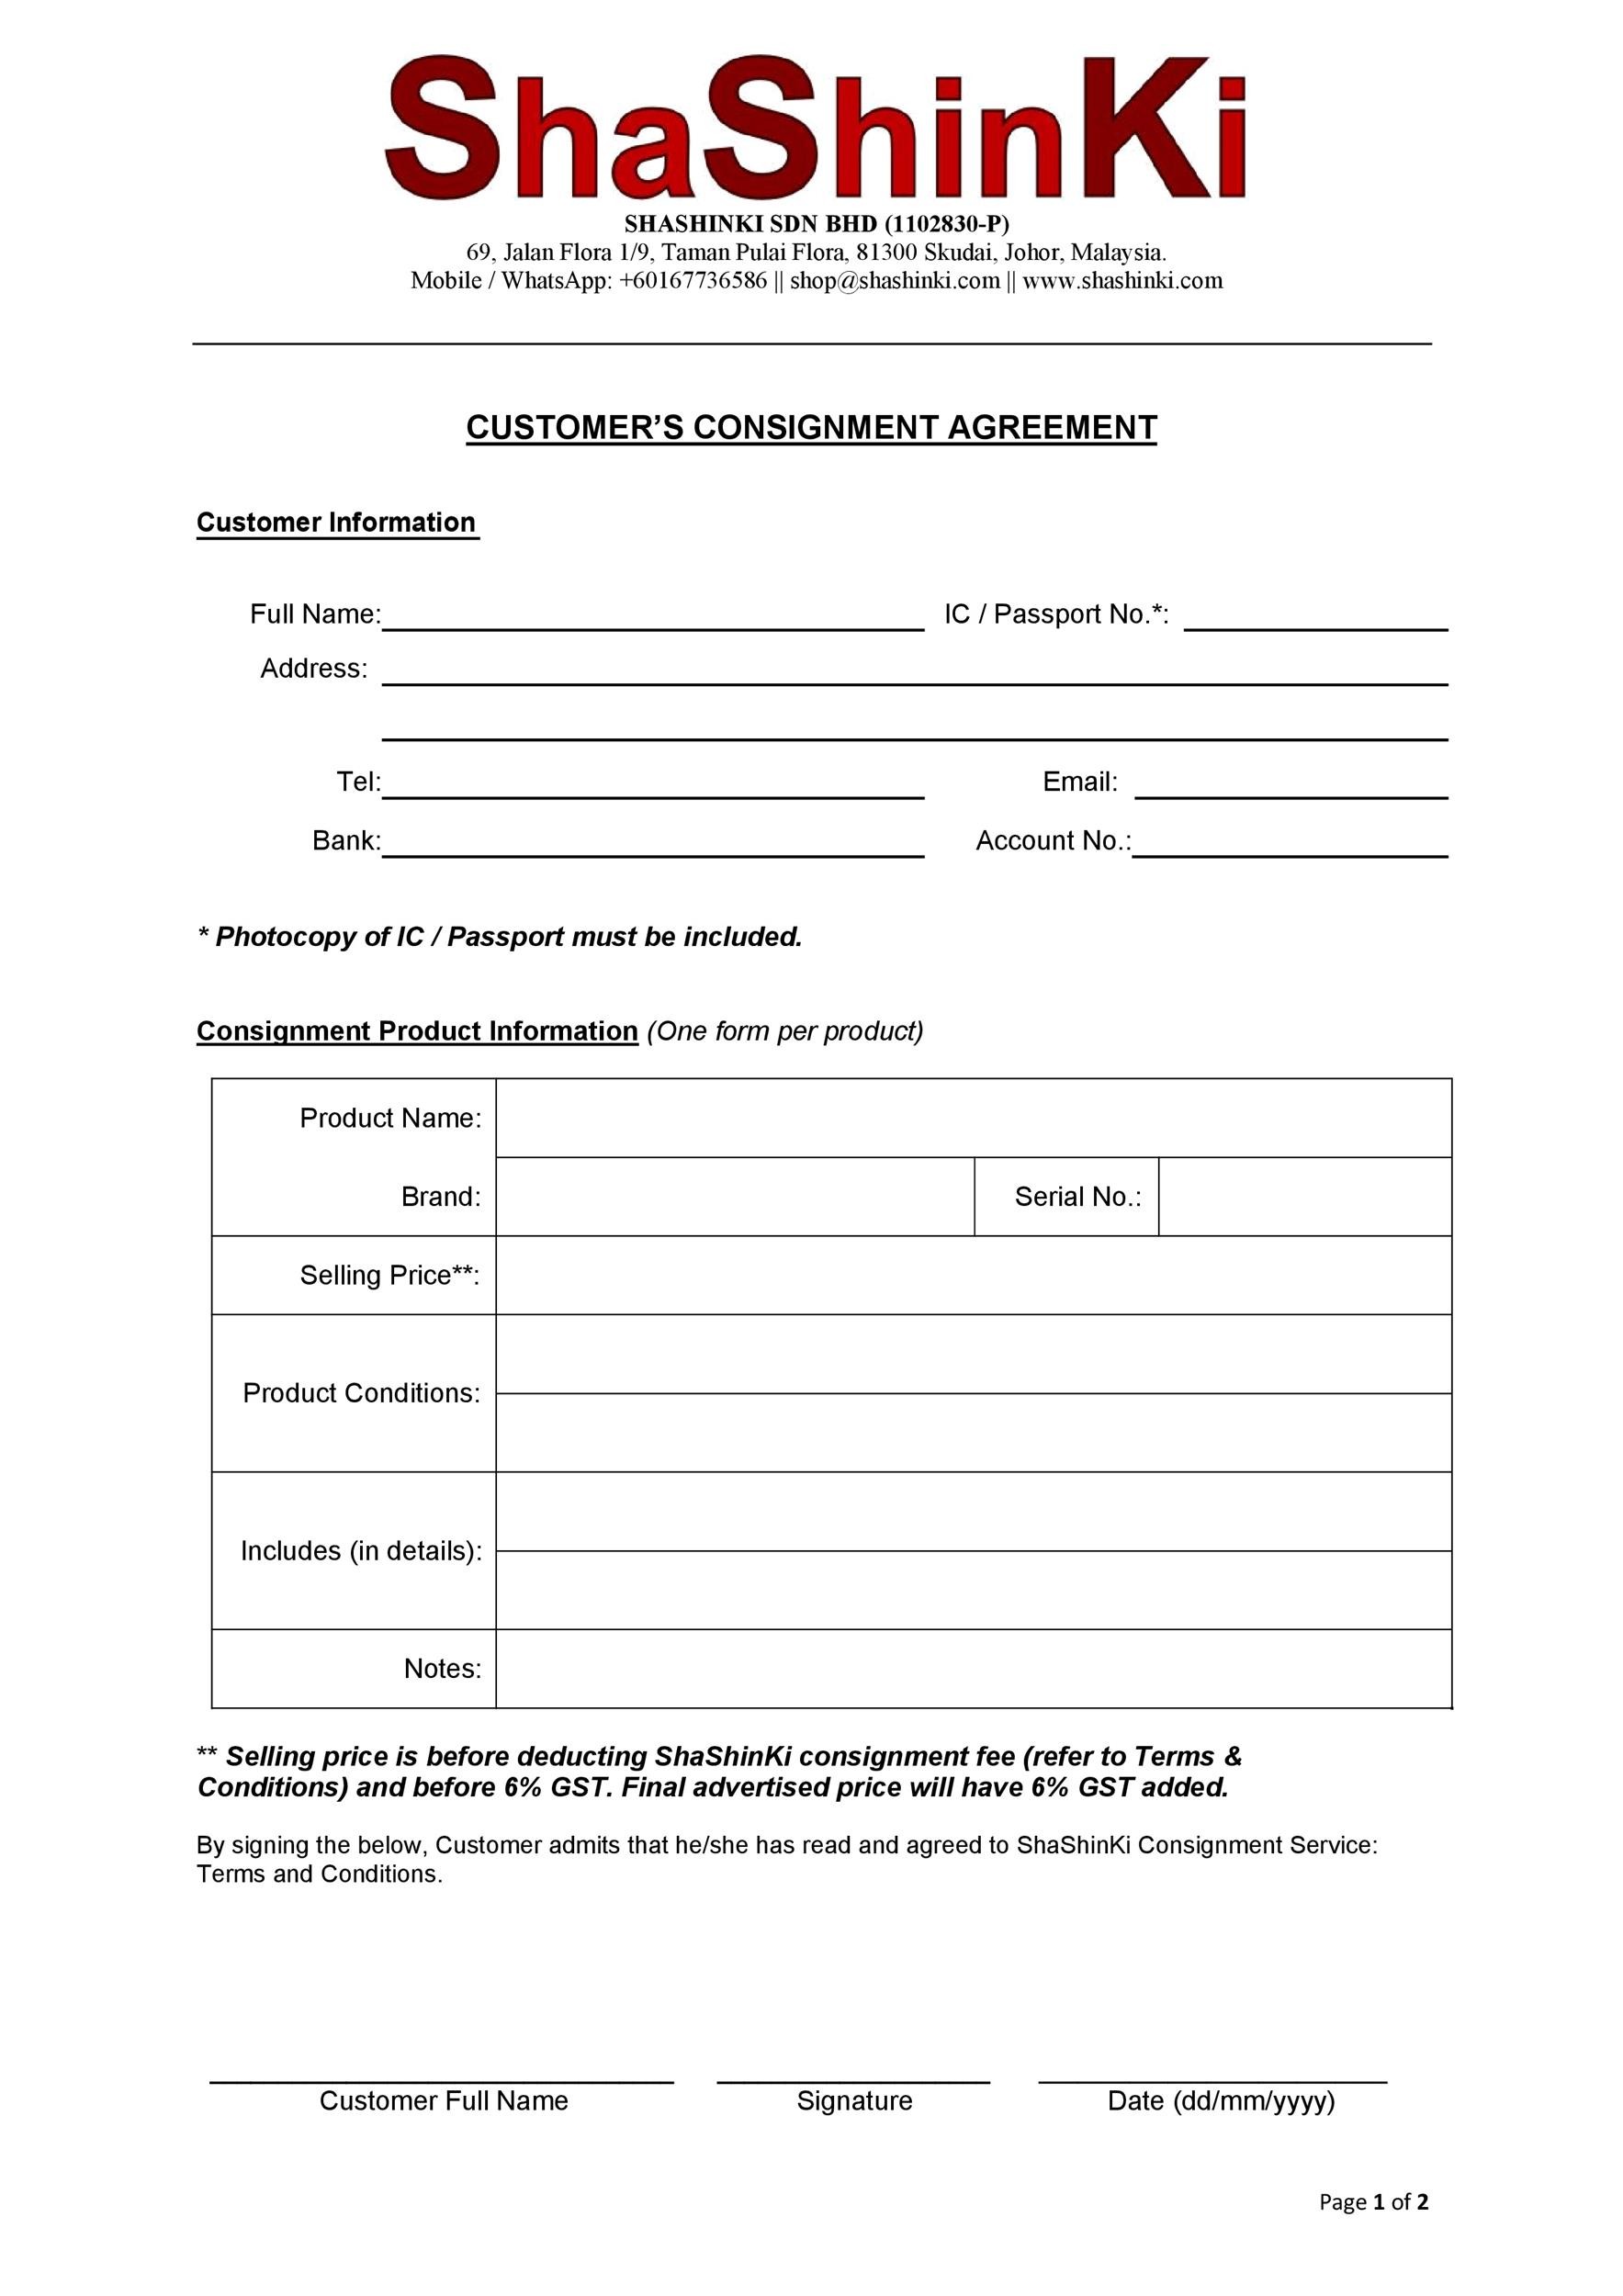 40+ Best Consignment Agreement Templates & Forms ᐅ TemplateLab